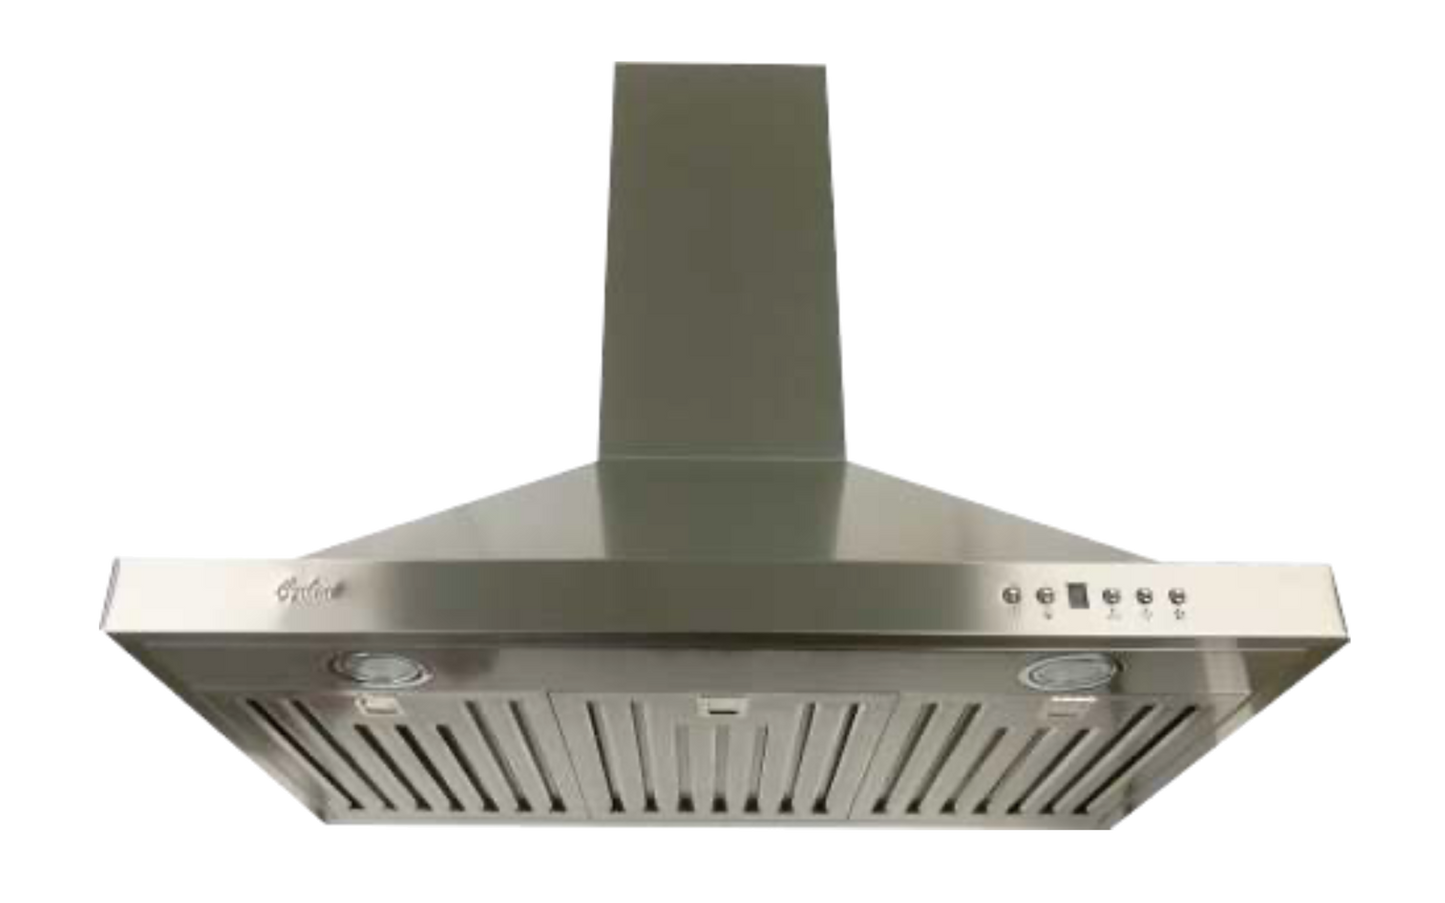 Cyclone Alito Collection SC519 24" Wall Mount Range Hood Kitchen Exhaust Fan With Mesh Filters